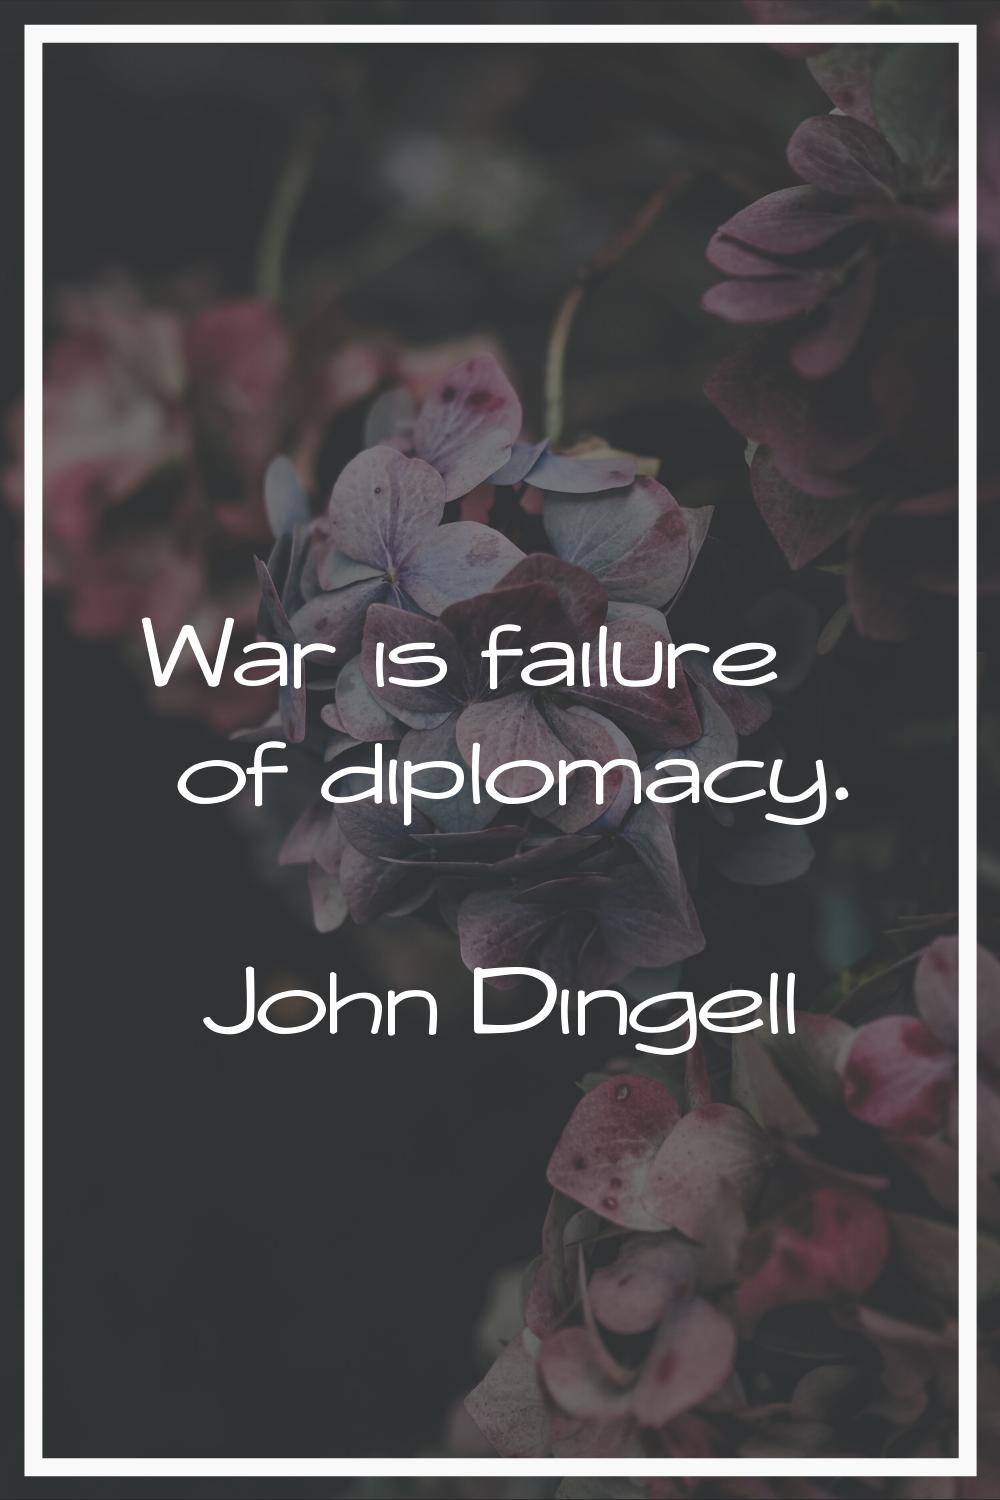 War is failure of diplomacy.